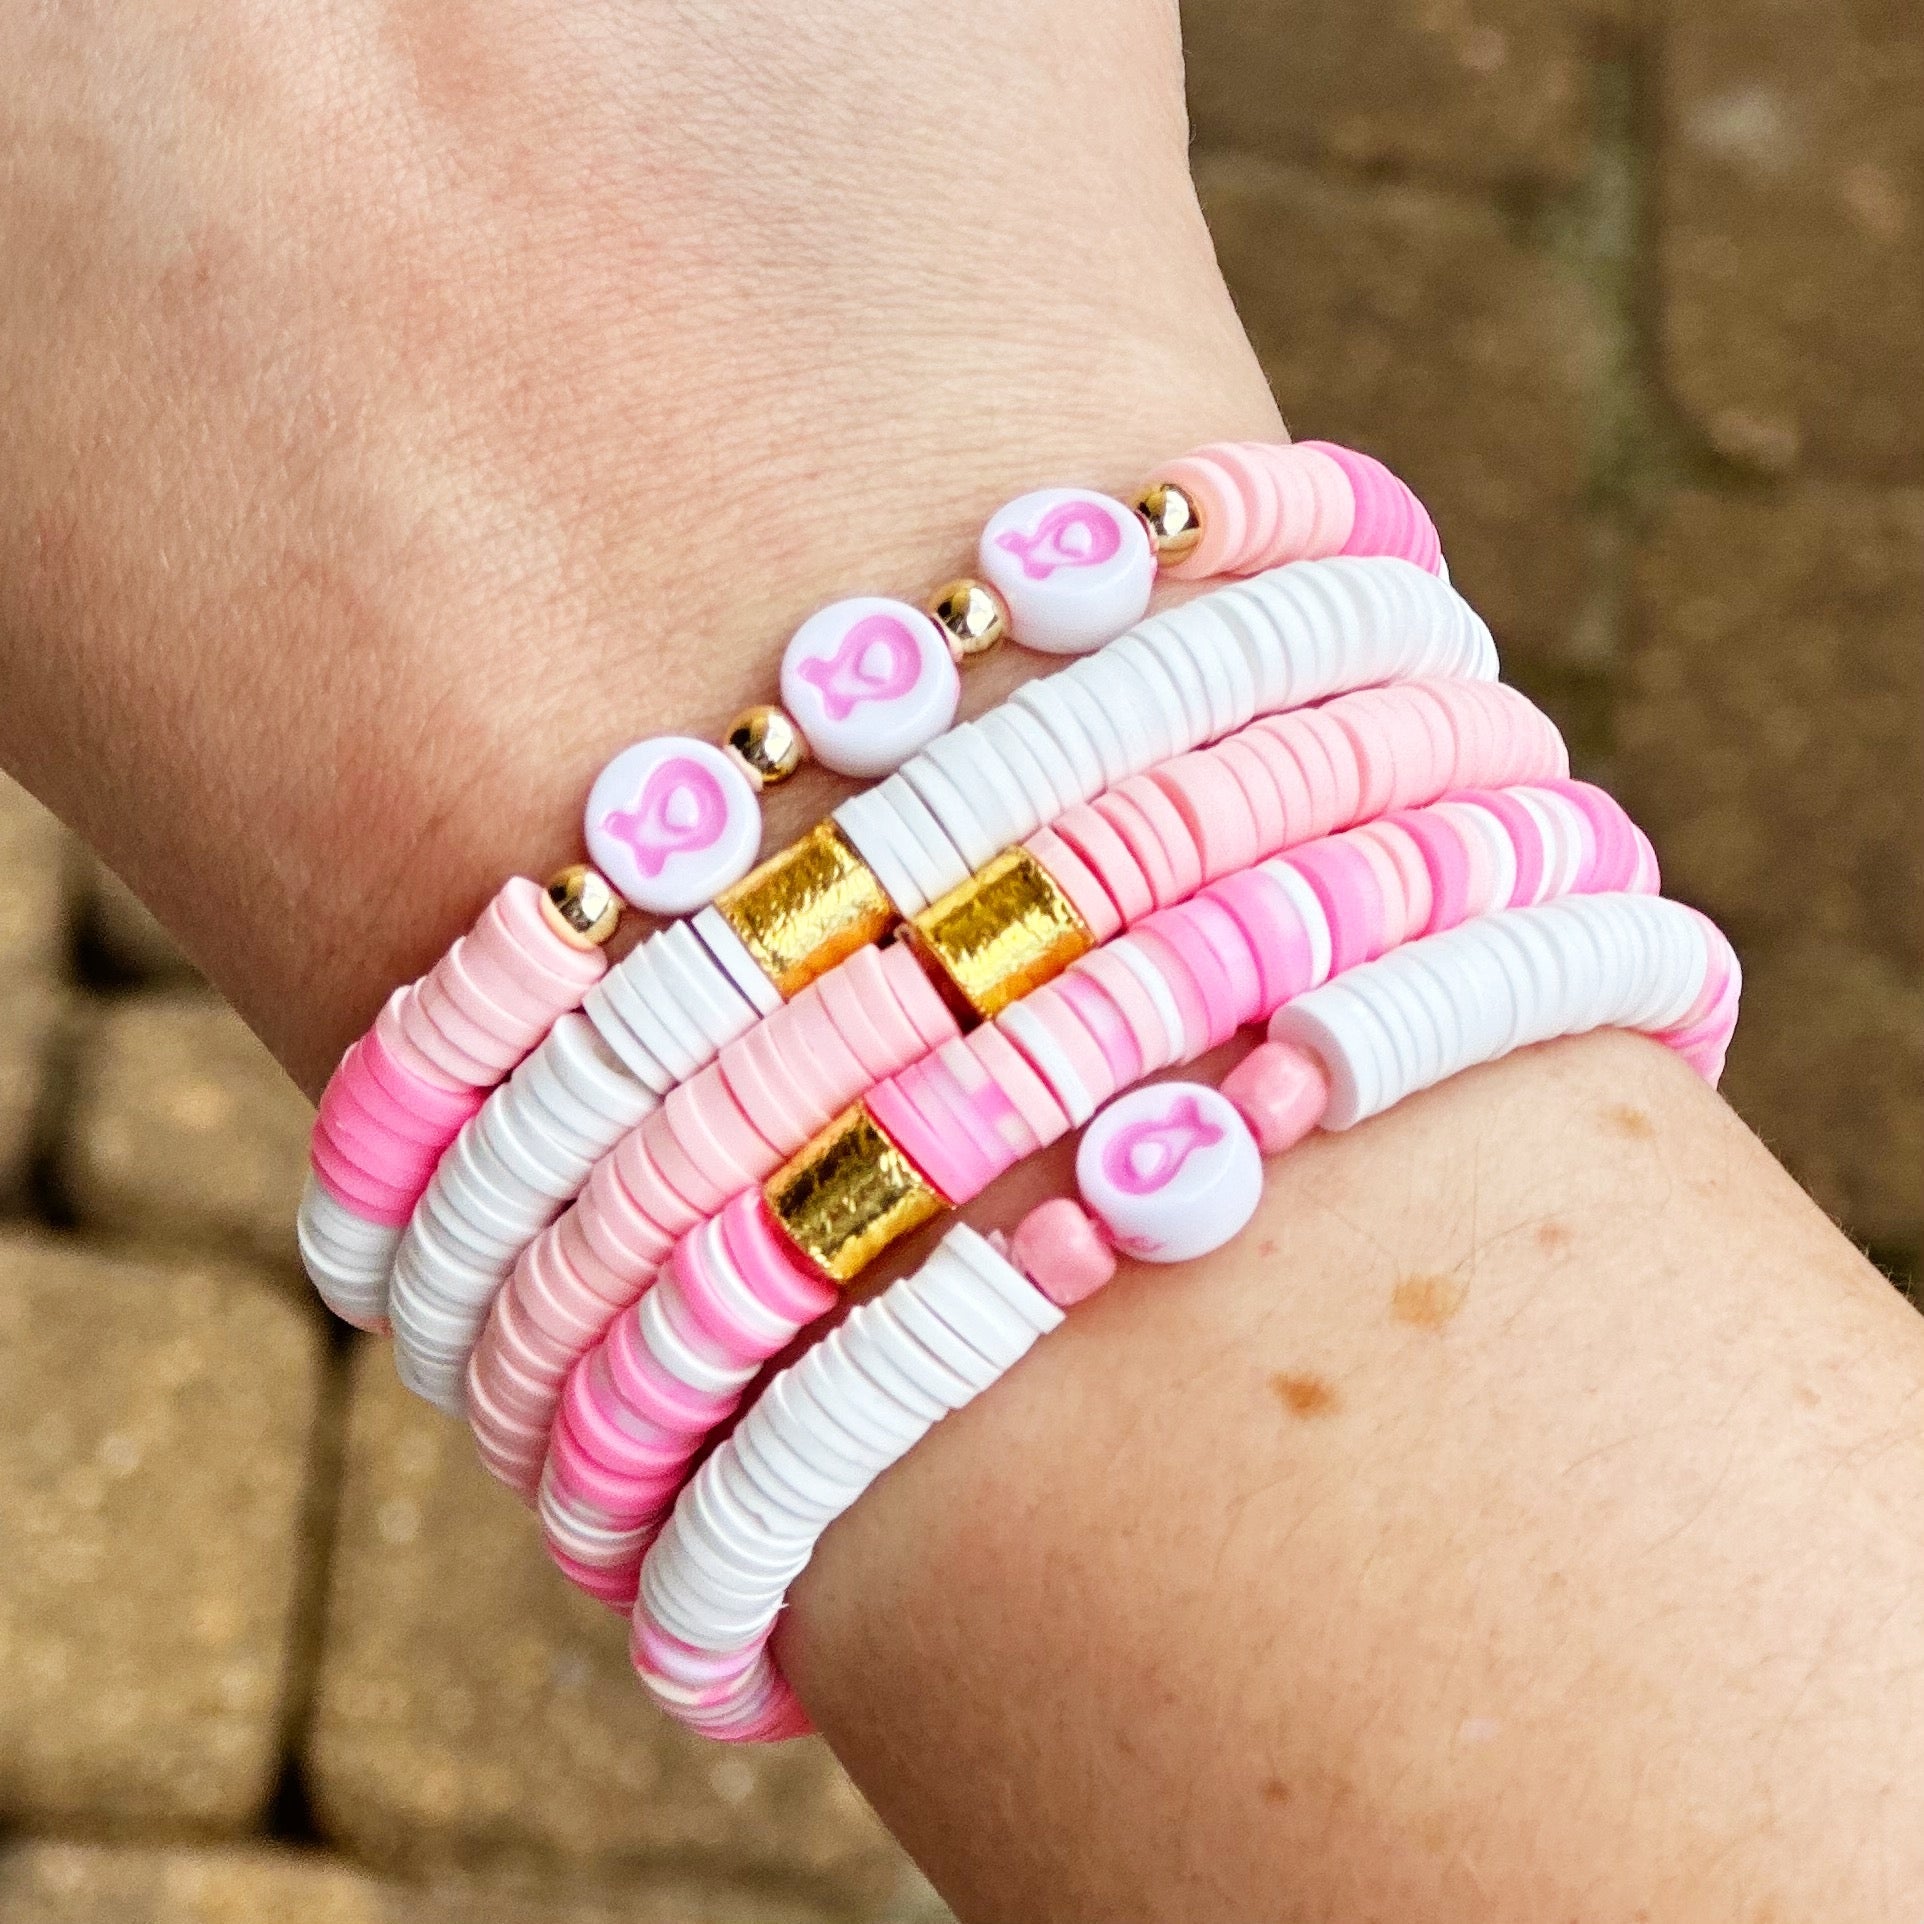 PEIMKO Hope Breast Cancer Survivor Gifts for Women, India | Ubuy